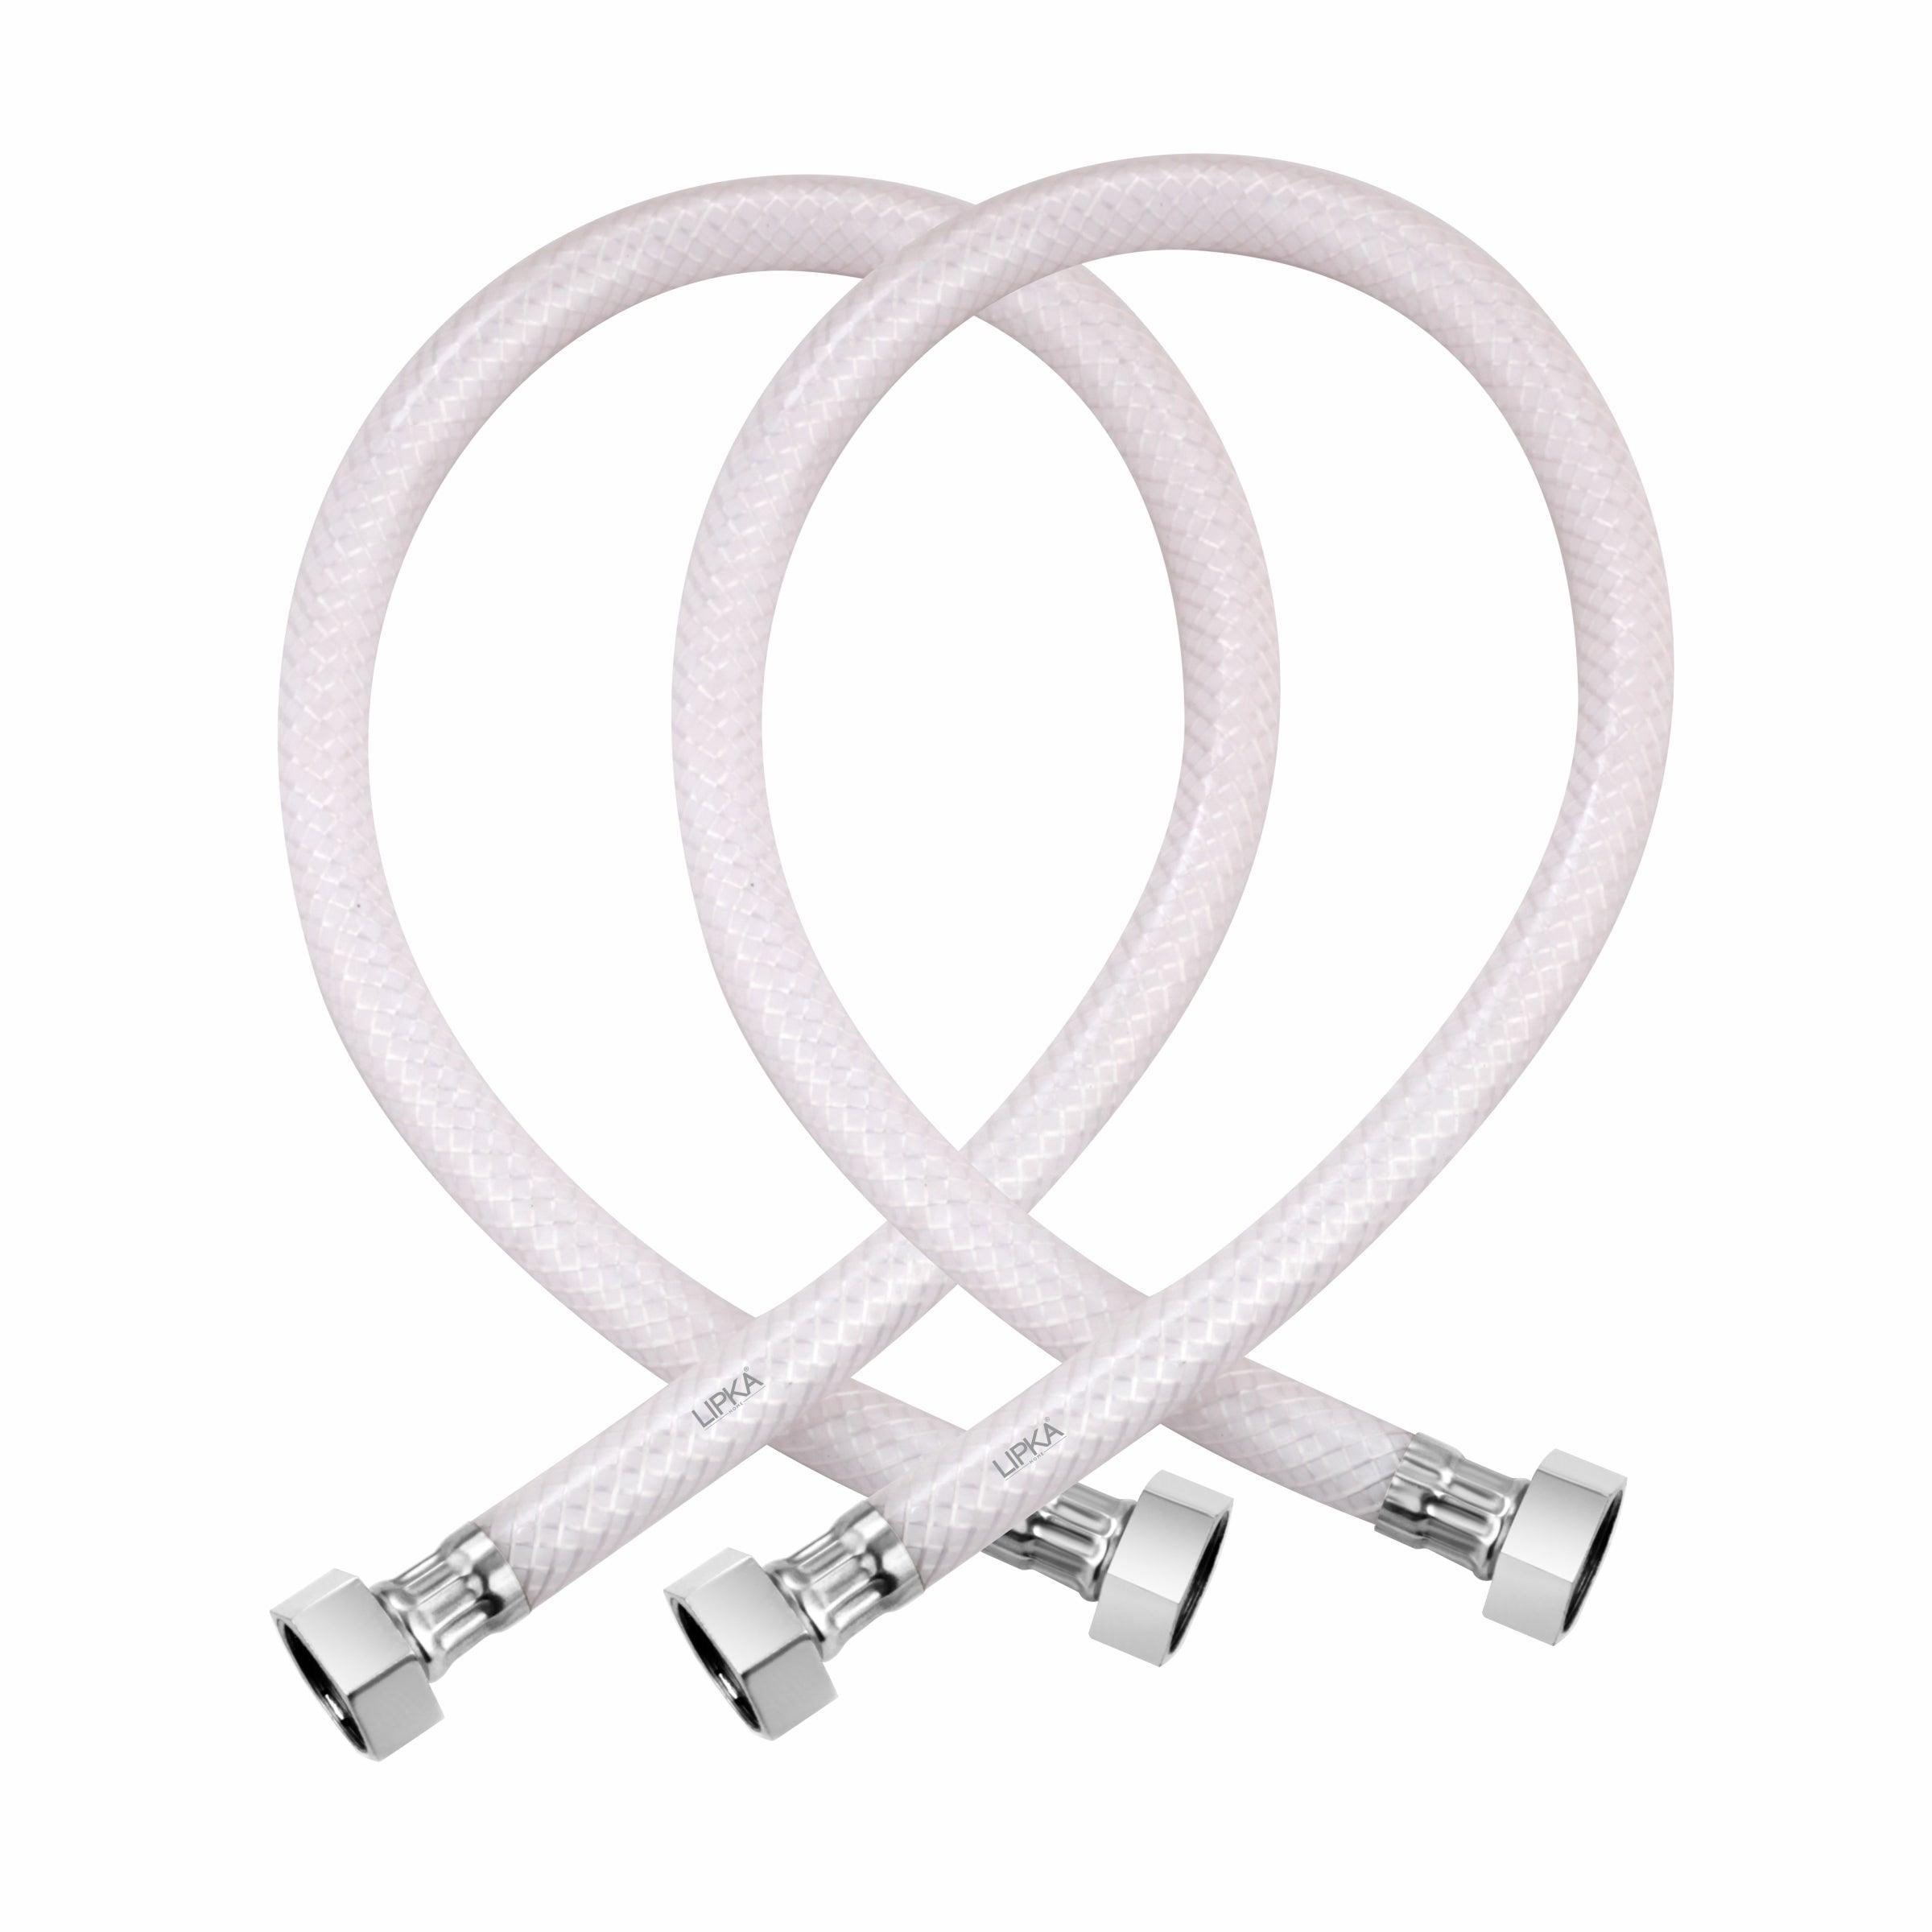 Connection Pipe PVC (18 Inches) (Pack of 2)